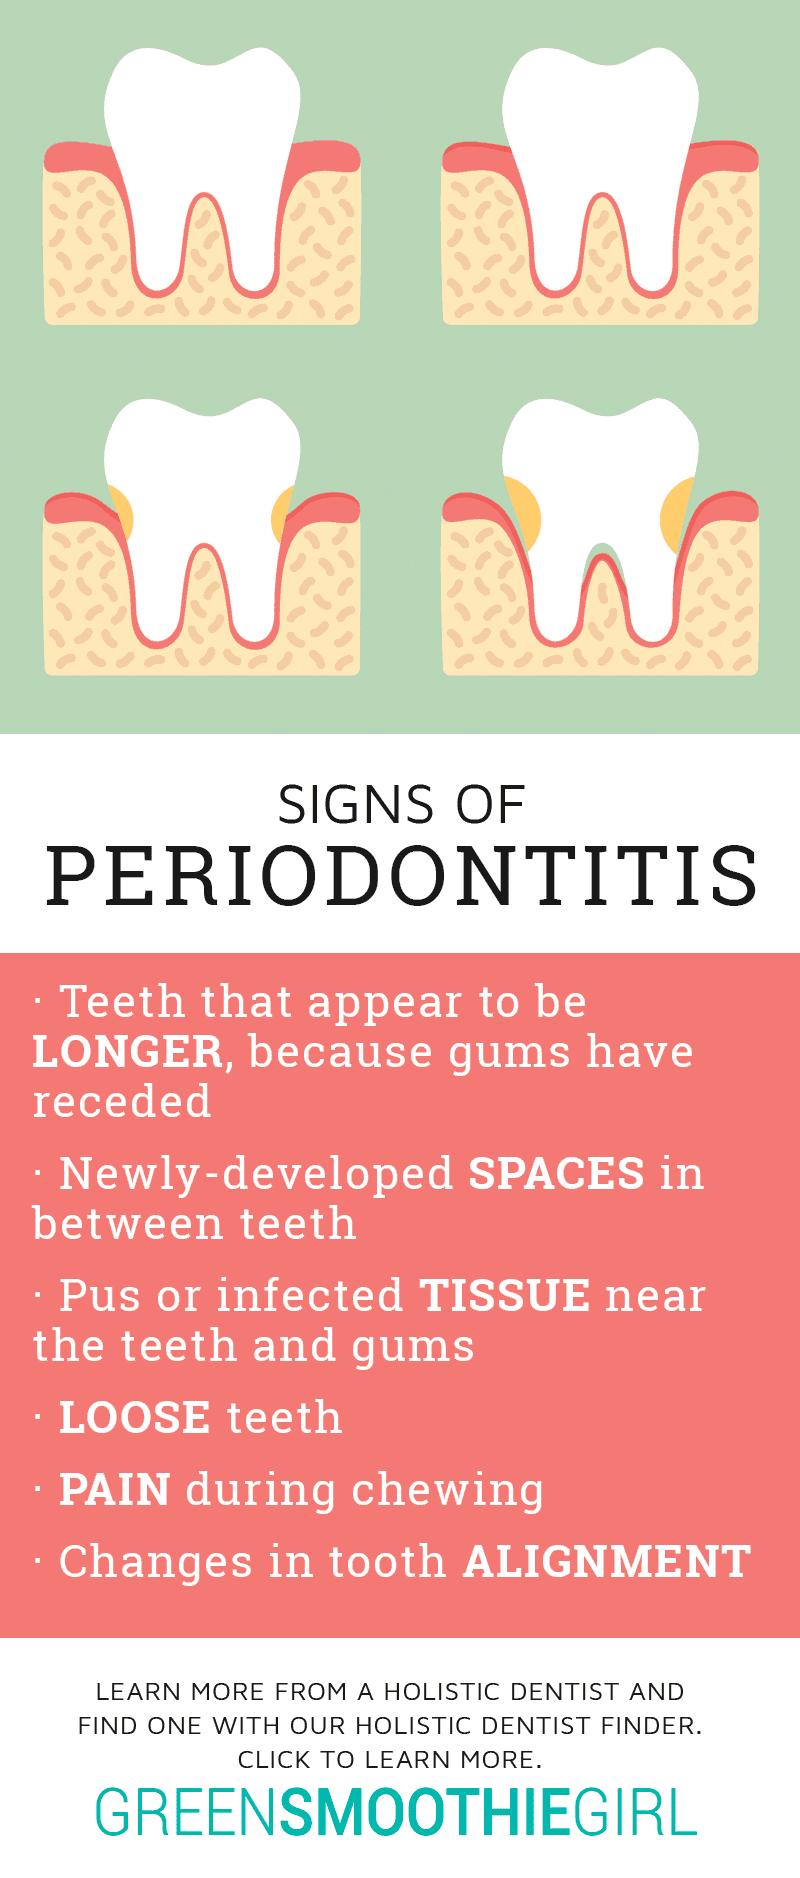 Periodontitis vs Gingivitis: Know the Differences & Warning Signs